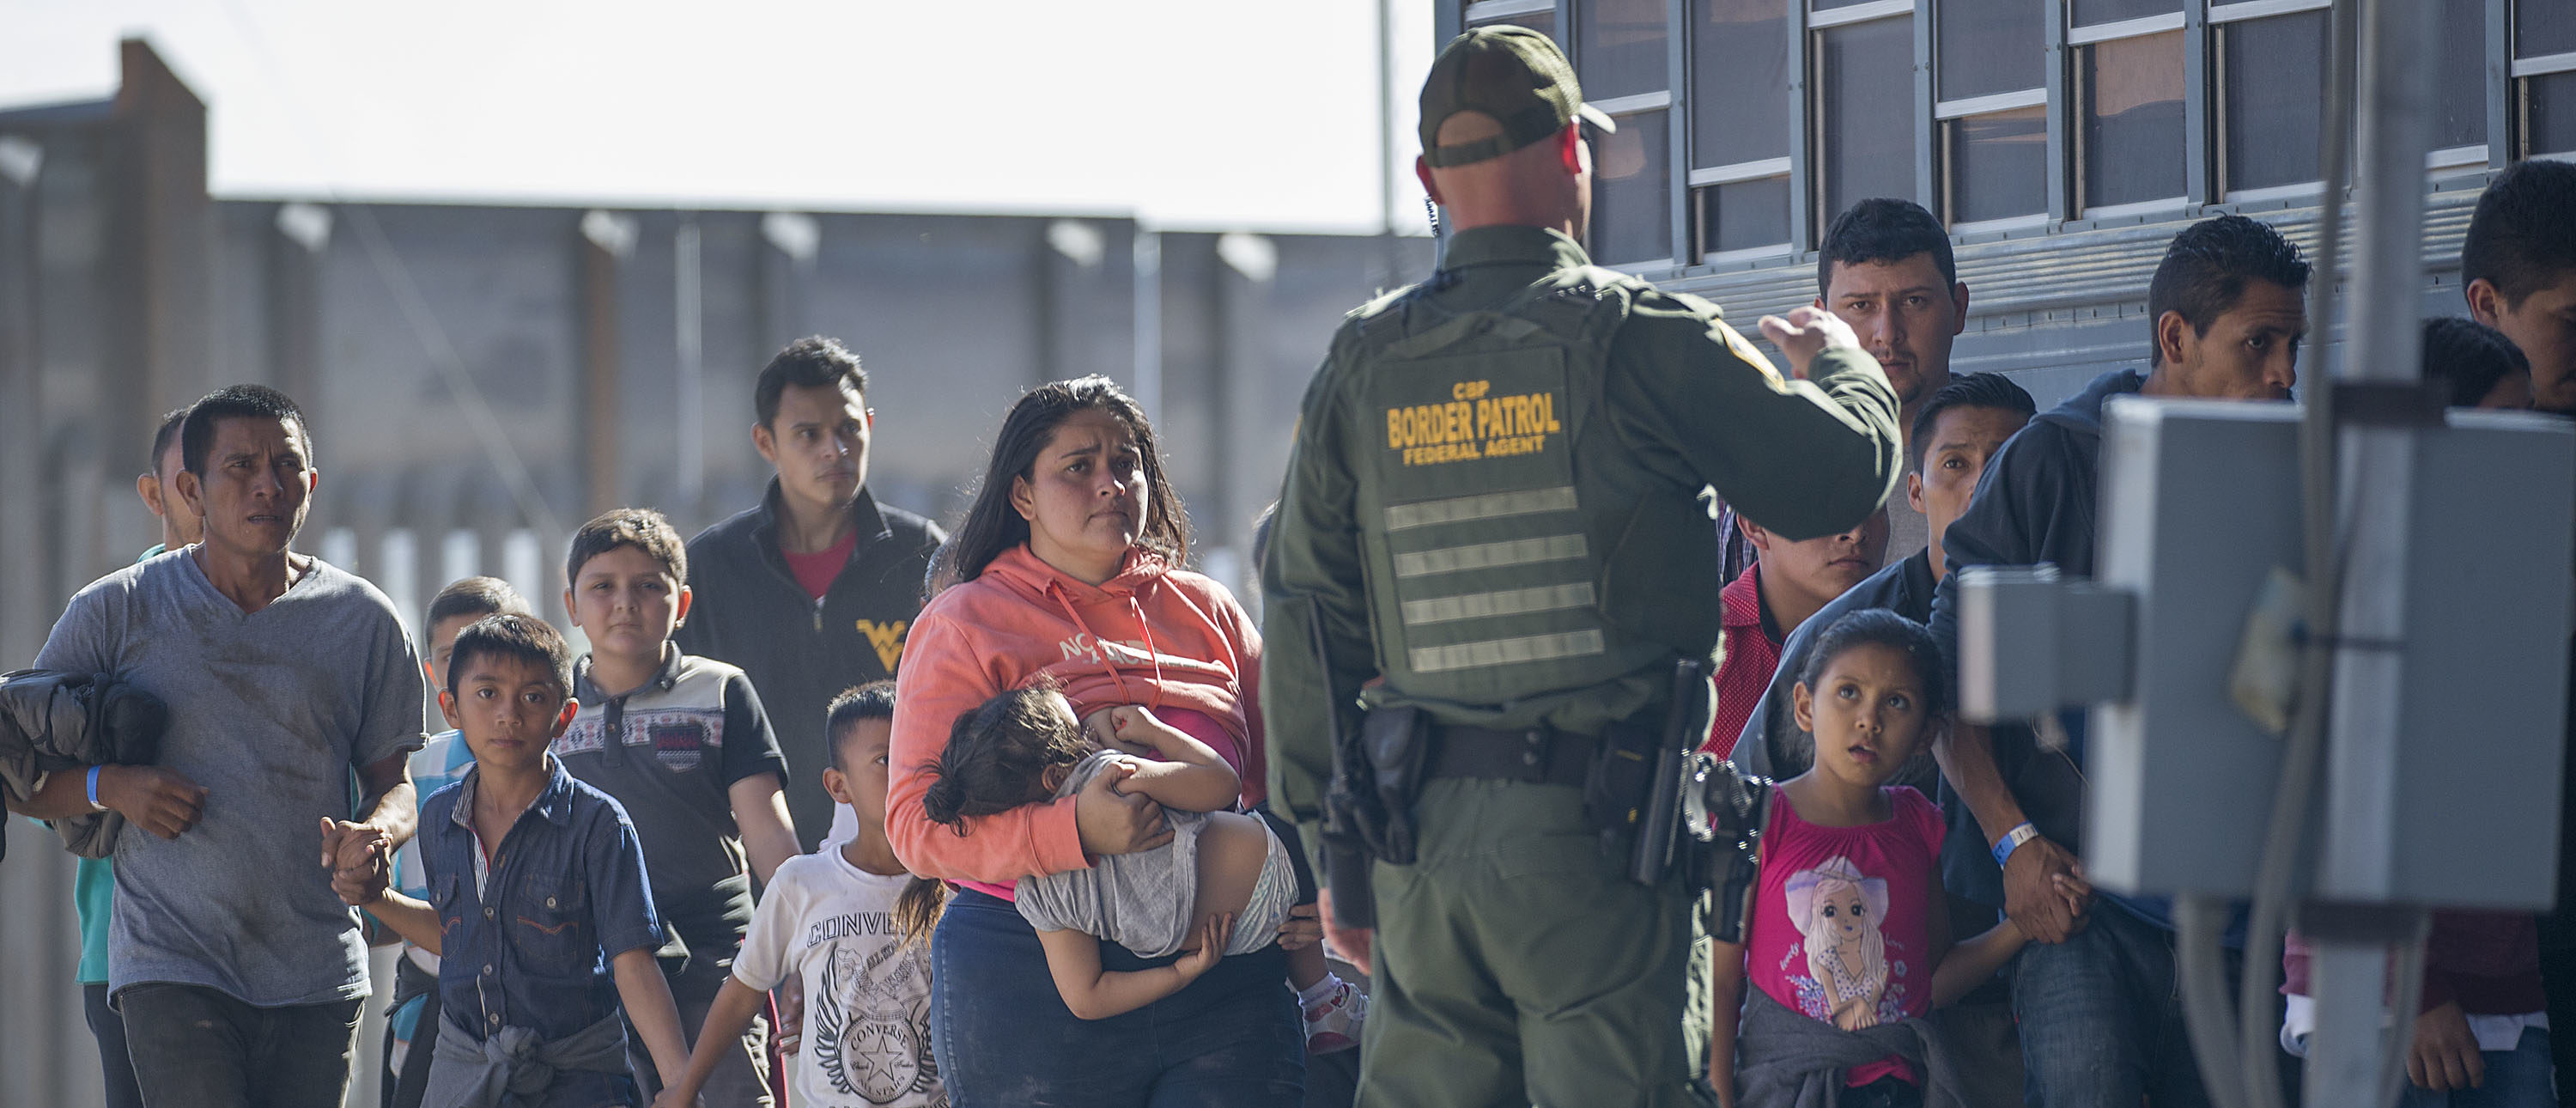 EL PASO, TEXAS - JUNE 01: Migrants are loaded onto a bus by U.S. Border Patrol agents after being detained when they crossed into the United States from Mexico on June 01, 2019 in El Paso, Texas. The location is in an area where migrants frequently turn themselves in to Border Patrol and ask for asylum after crossing the border. In recent months, U.S. immigration officials have seen a surge in the number of asylum seekers arriving at the border. (Photo by Joe Raedle/Getty Images)